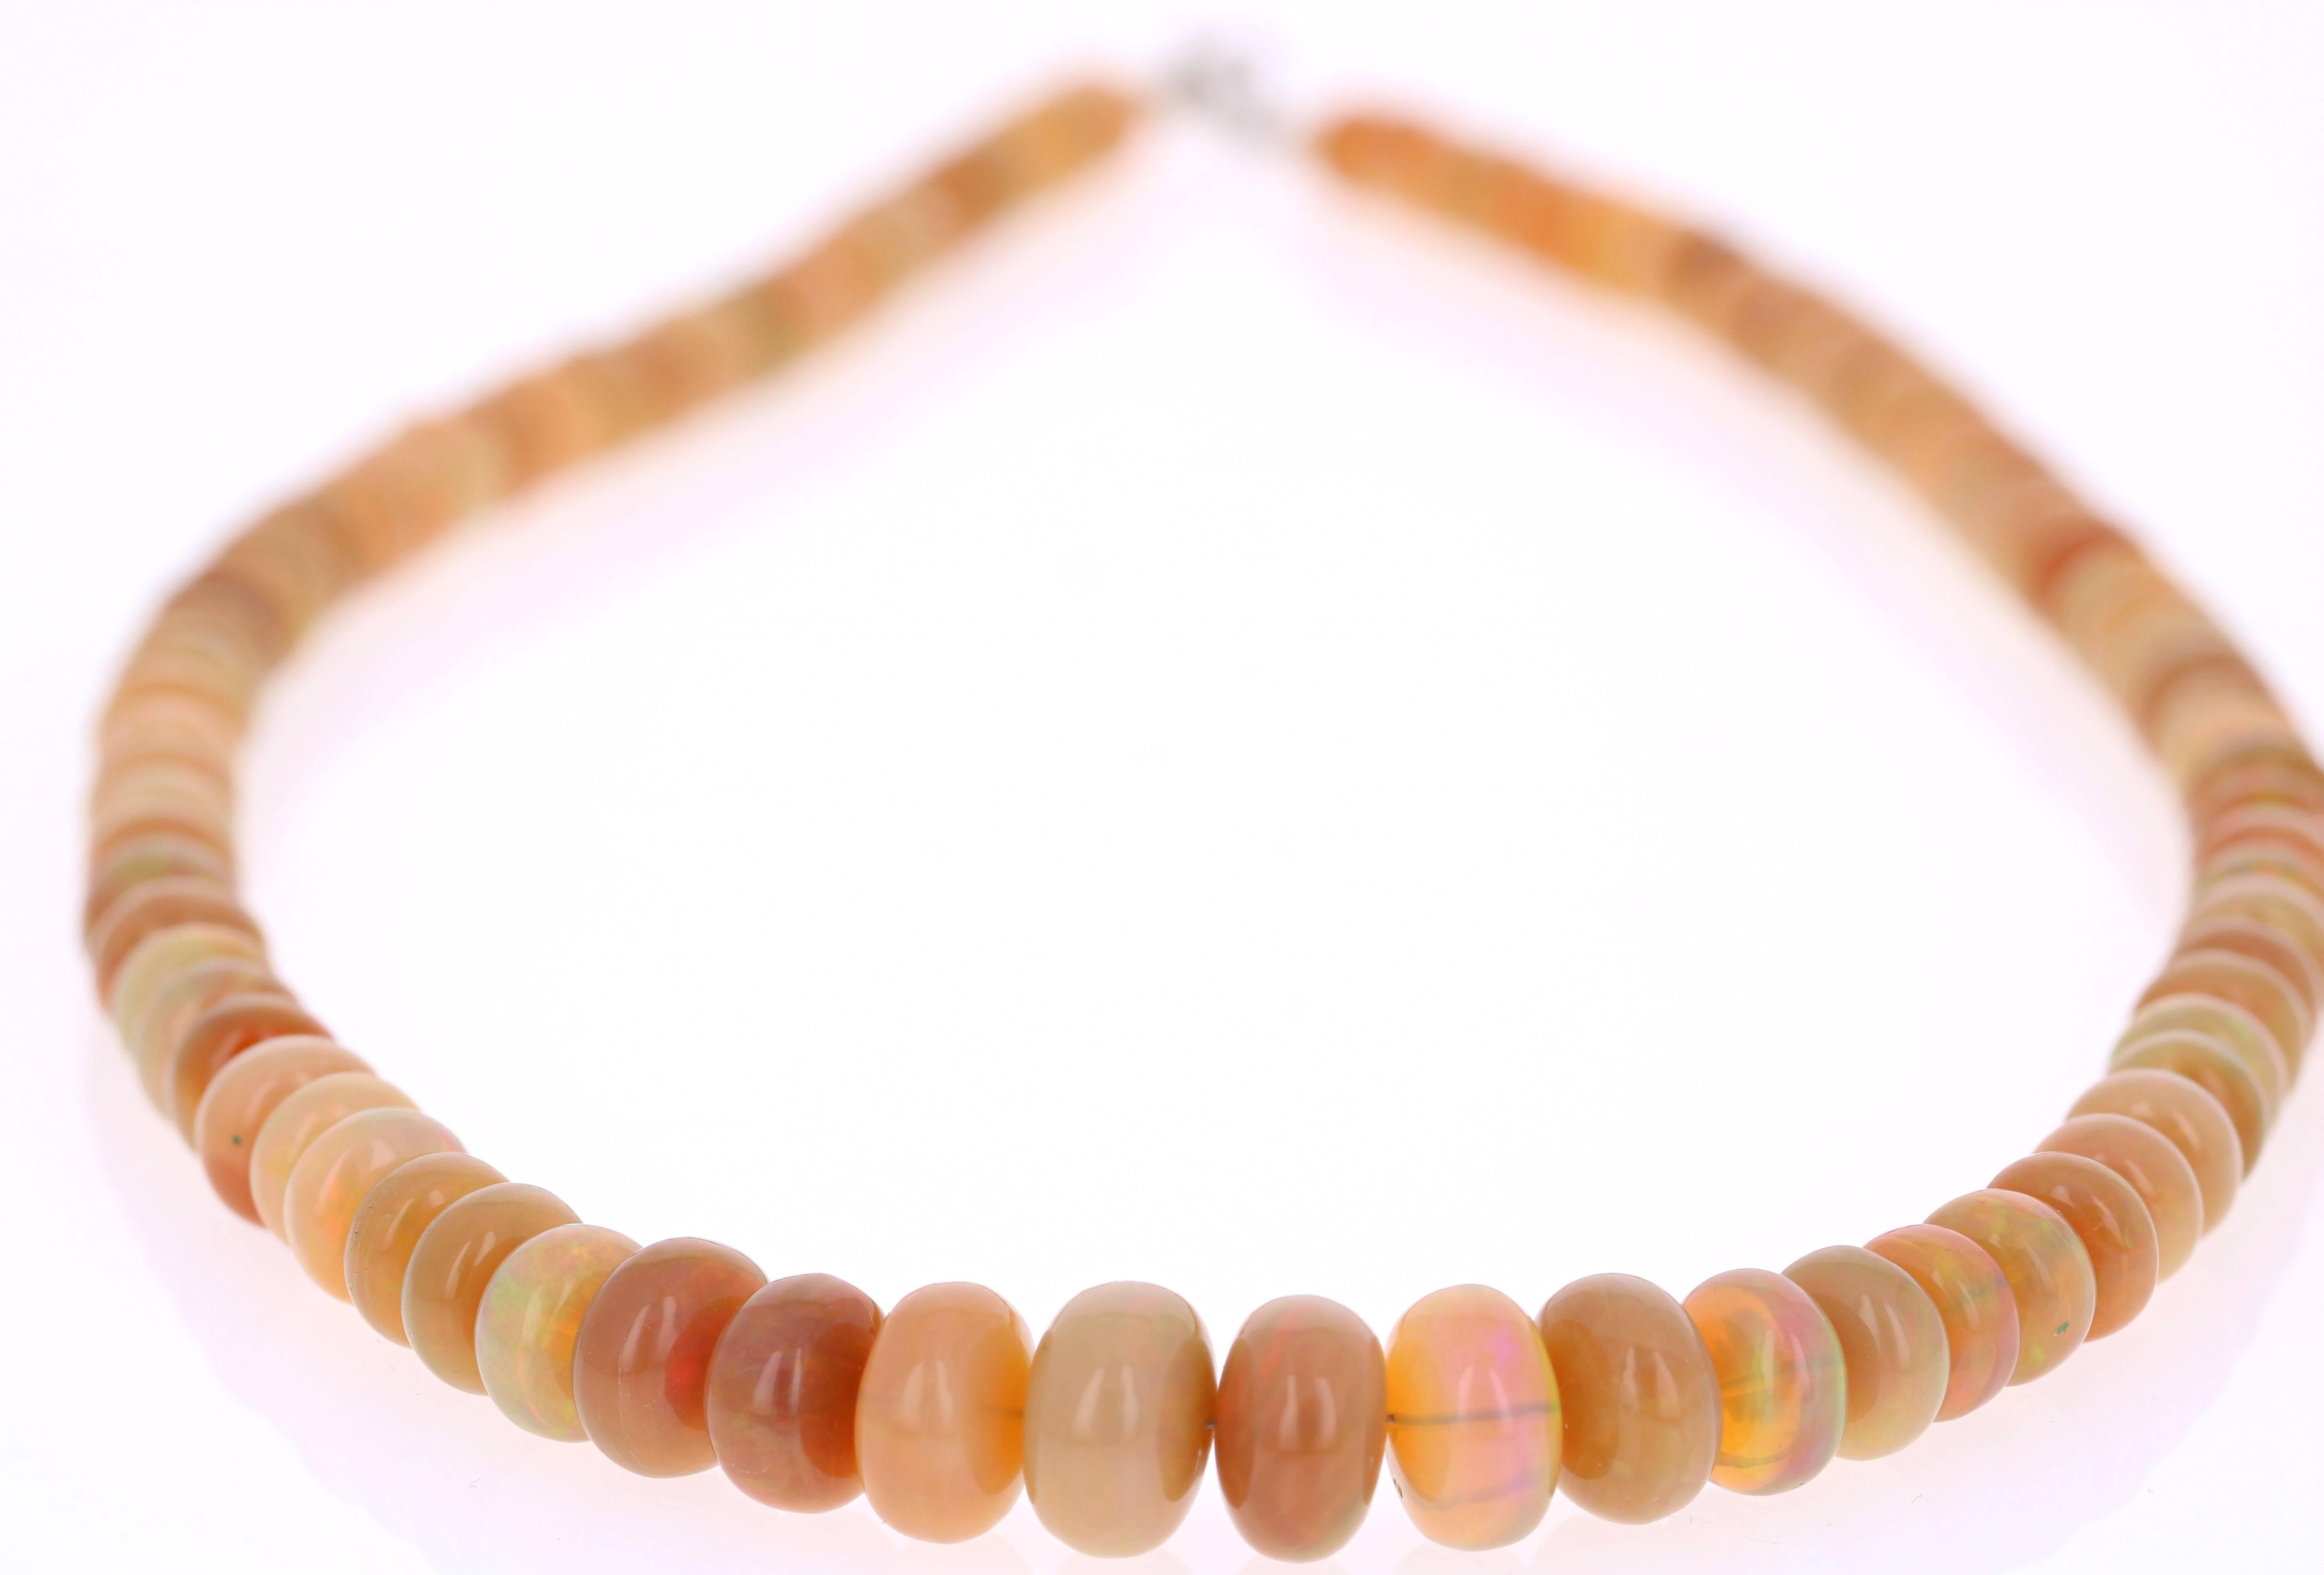 Gorgeous Ethiopian Opal Necklace with beautiful flashes of color. This rare strand of Opals with colors ranging from orange, yellow, peach, tan, and coral have green, pink, yellow and some red flashes of color. These opals have an origin of